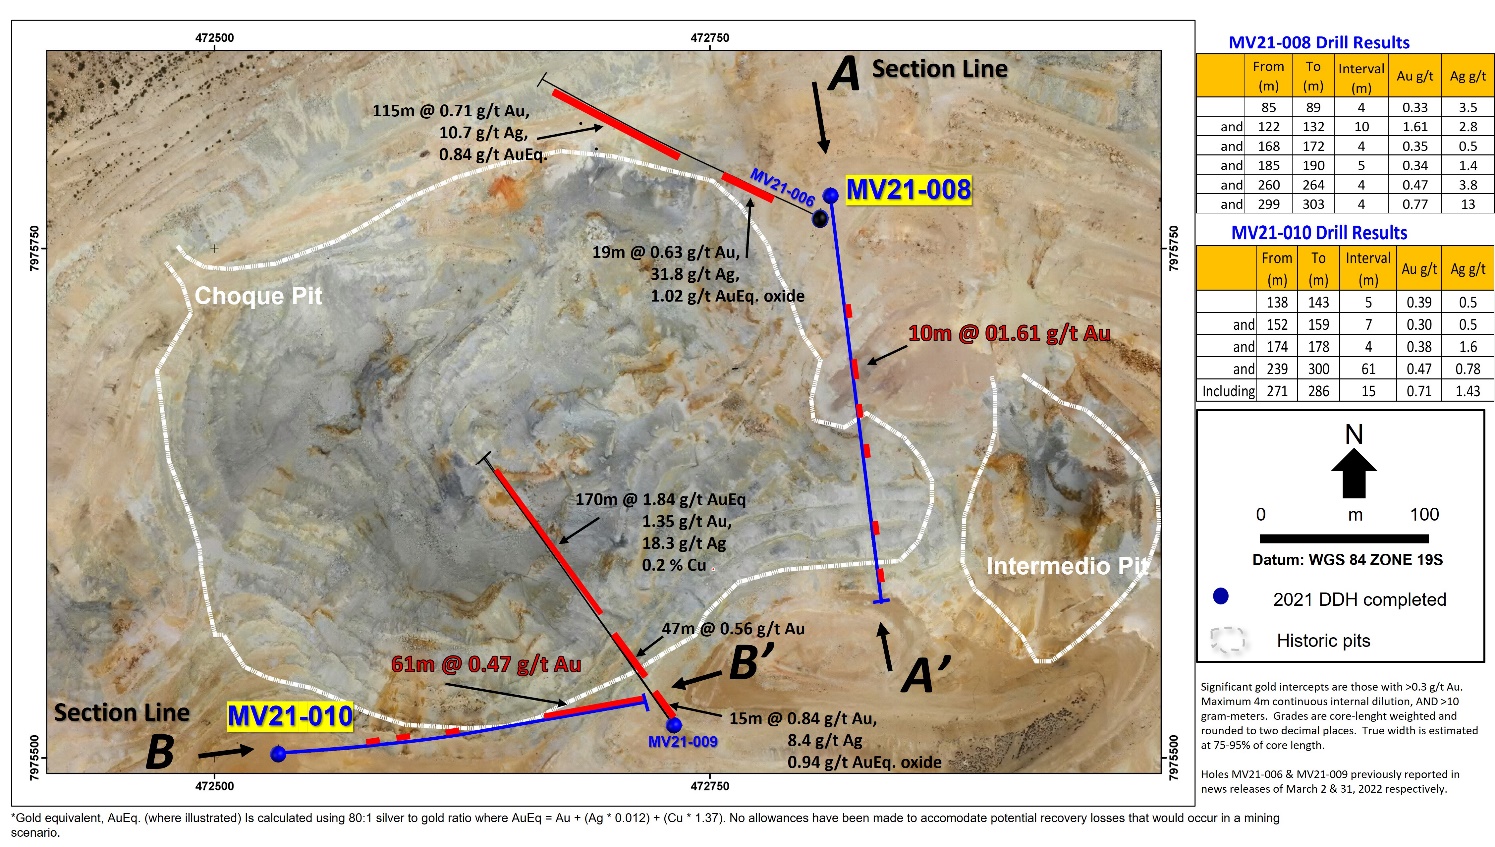 Figure 2: Plan Map of the Choque Pit